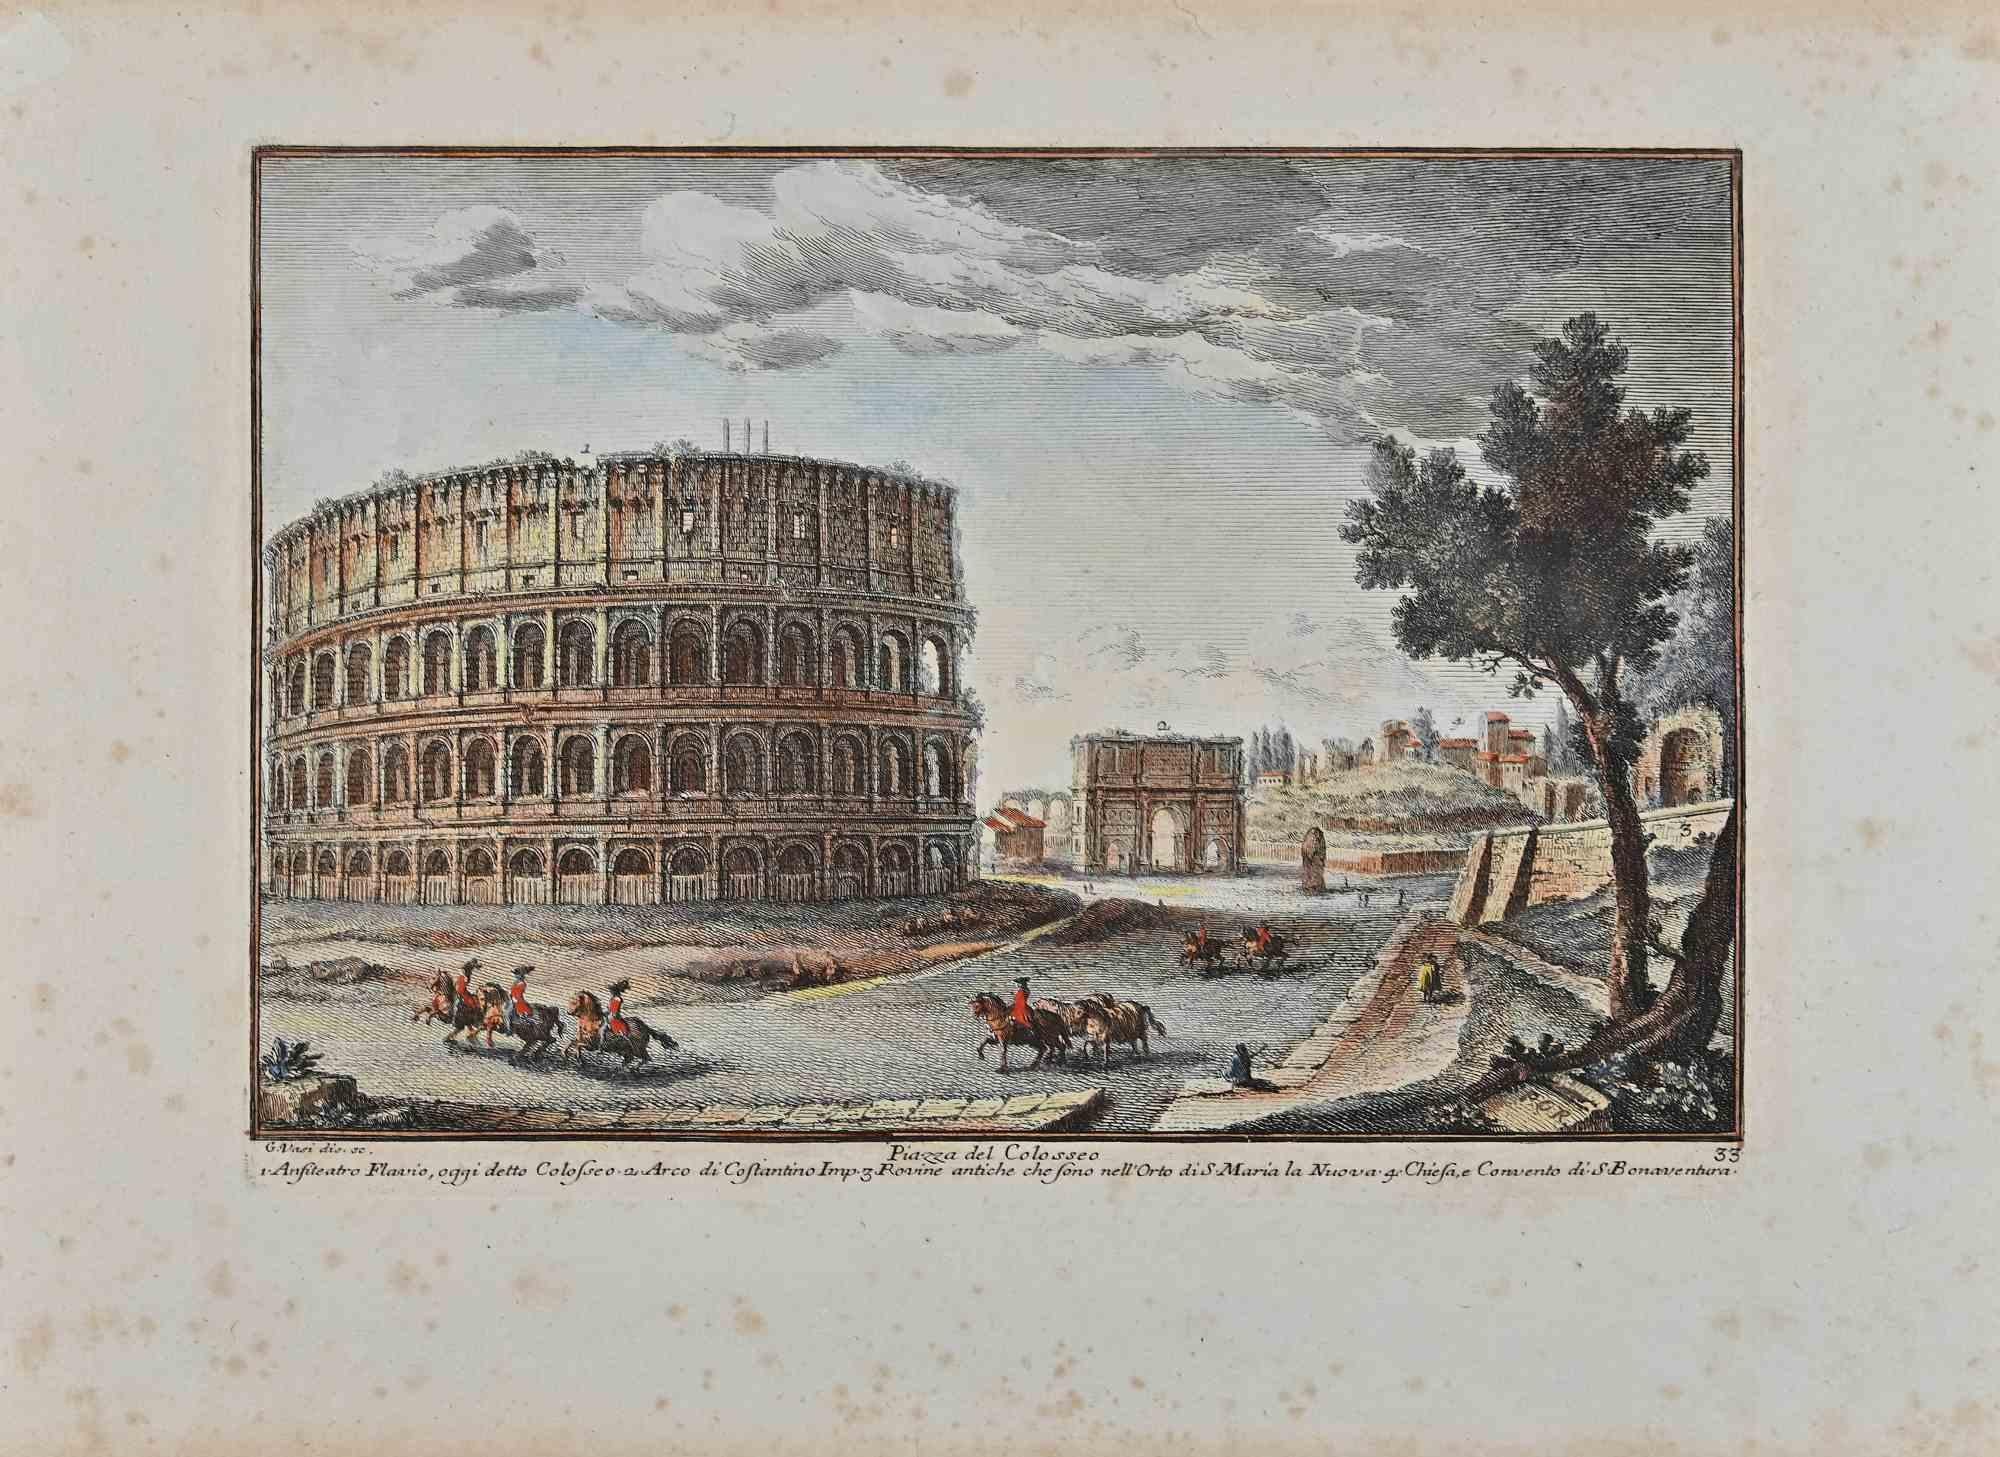 Piazza di Colosseo is an original etching of the Late 18th century realized by Giuseppe Vasi.

Signed and titled on plate lower margin. 

Good conditions and aged margins with some foxings.

Giuseppe Vasi  (Corleone,1710 - Rome, 1782) was an